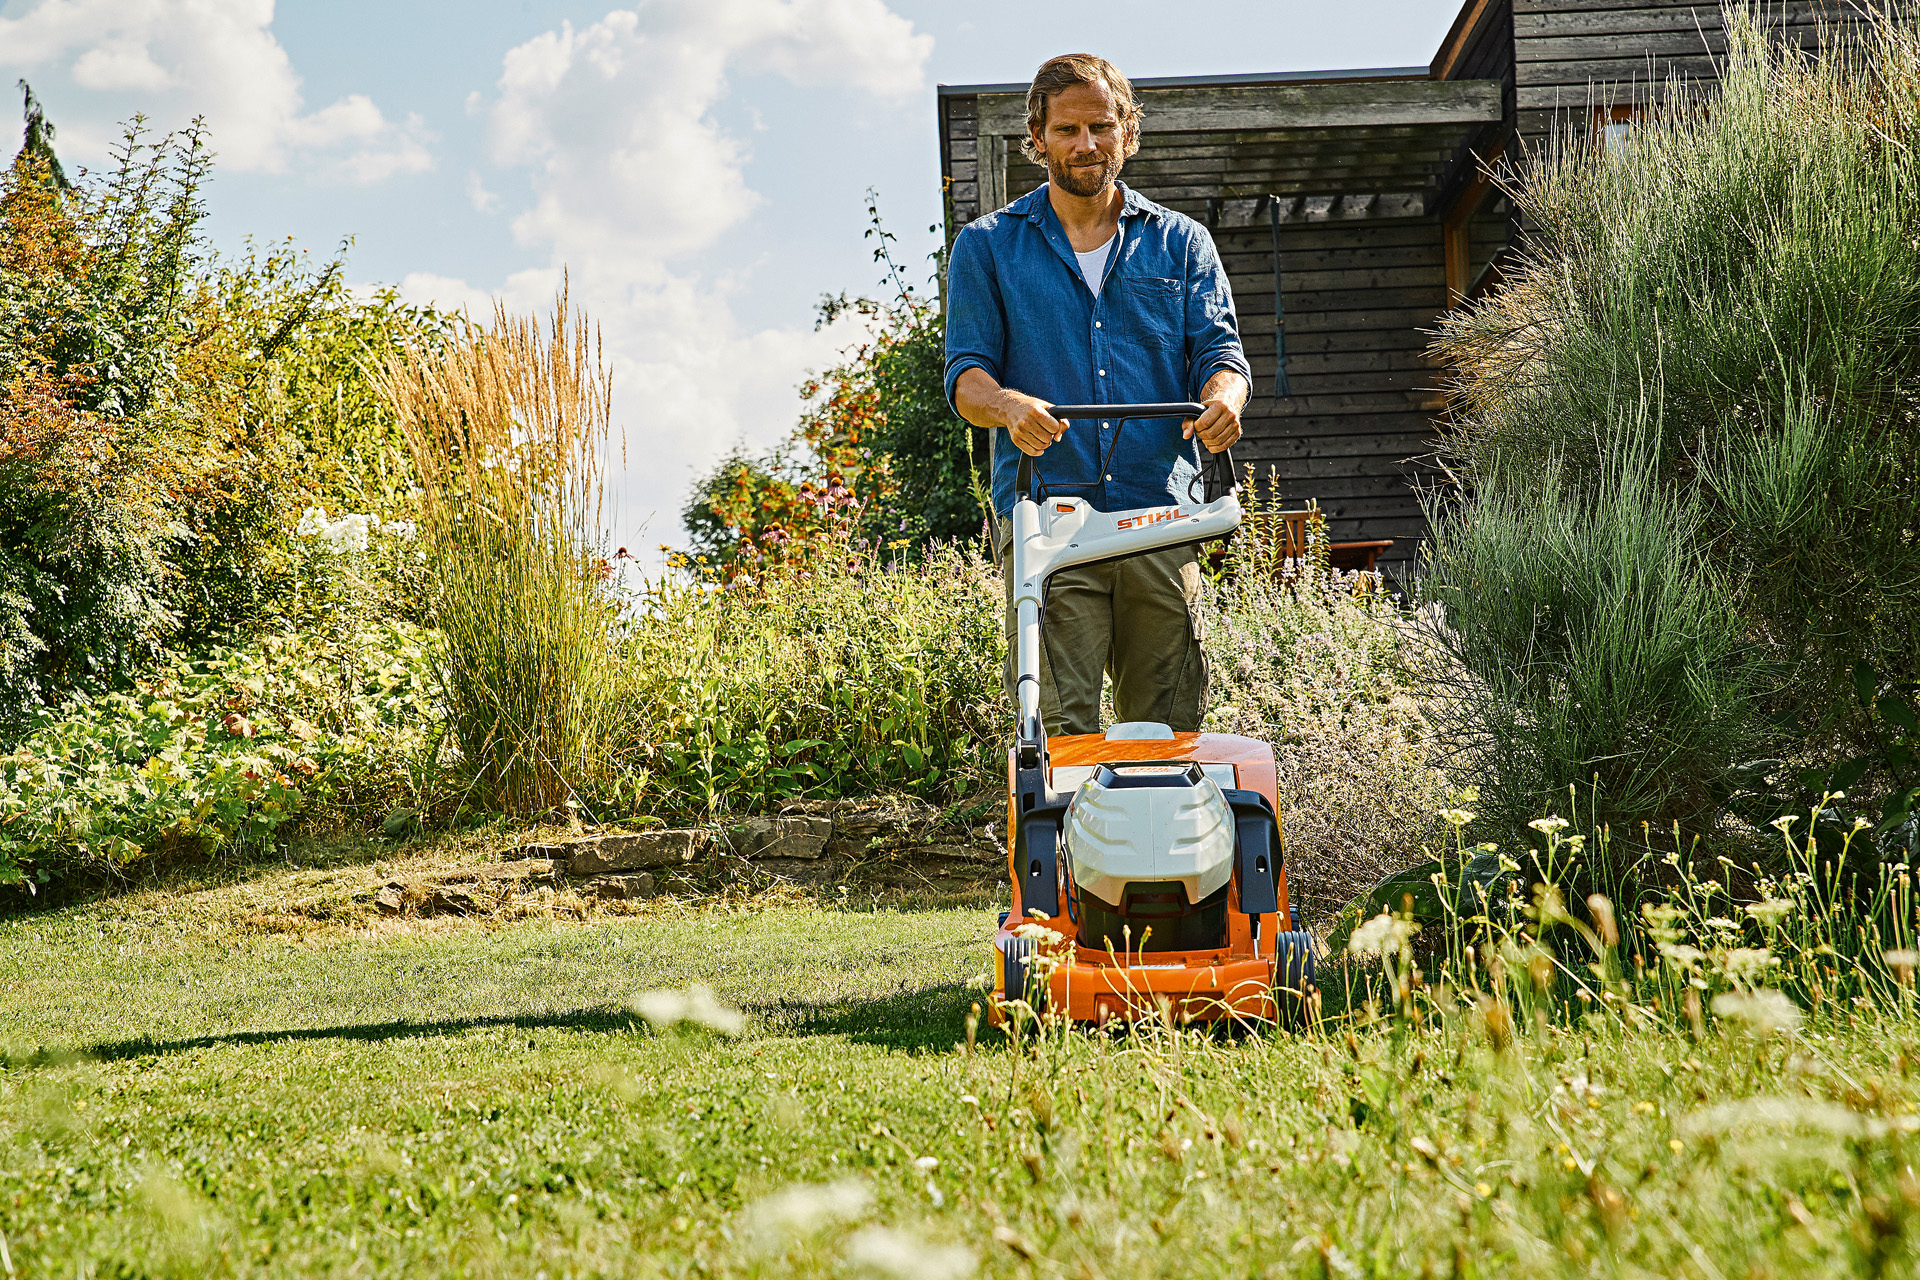 A man is halfway through mowing untidy and overgrown grass using a STIHL RMA 448 P-C cordless lawn mower, in a garden surrounded by tall shrubs and plants